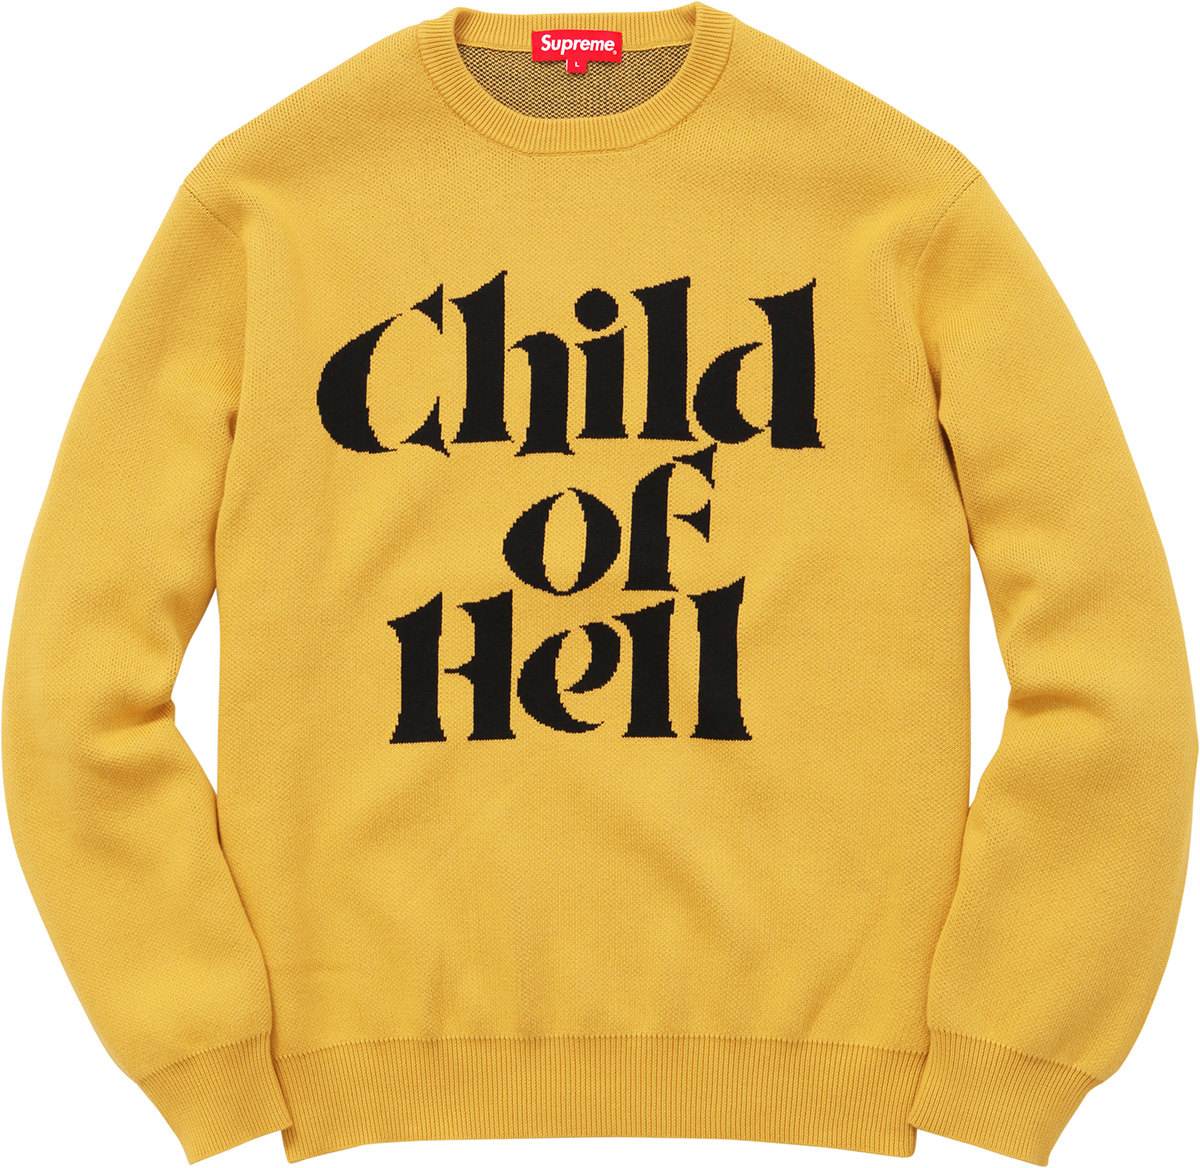 Child of Hell Sweater - fall winter 2015 - Supreme